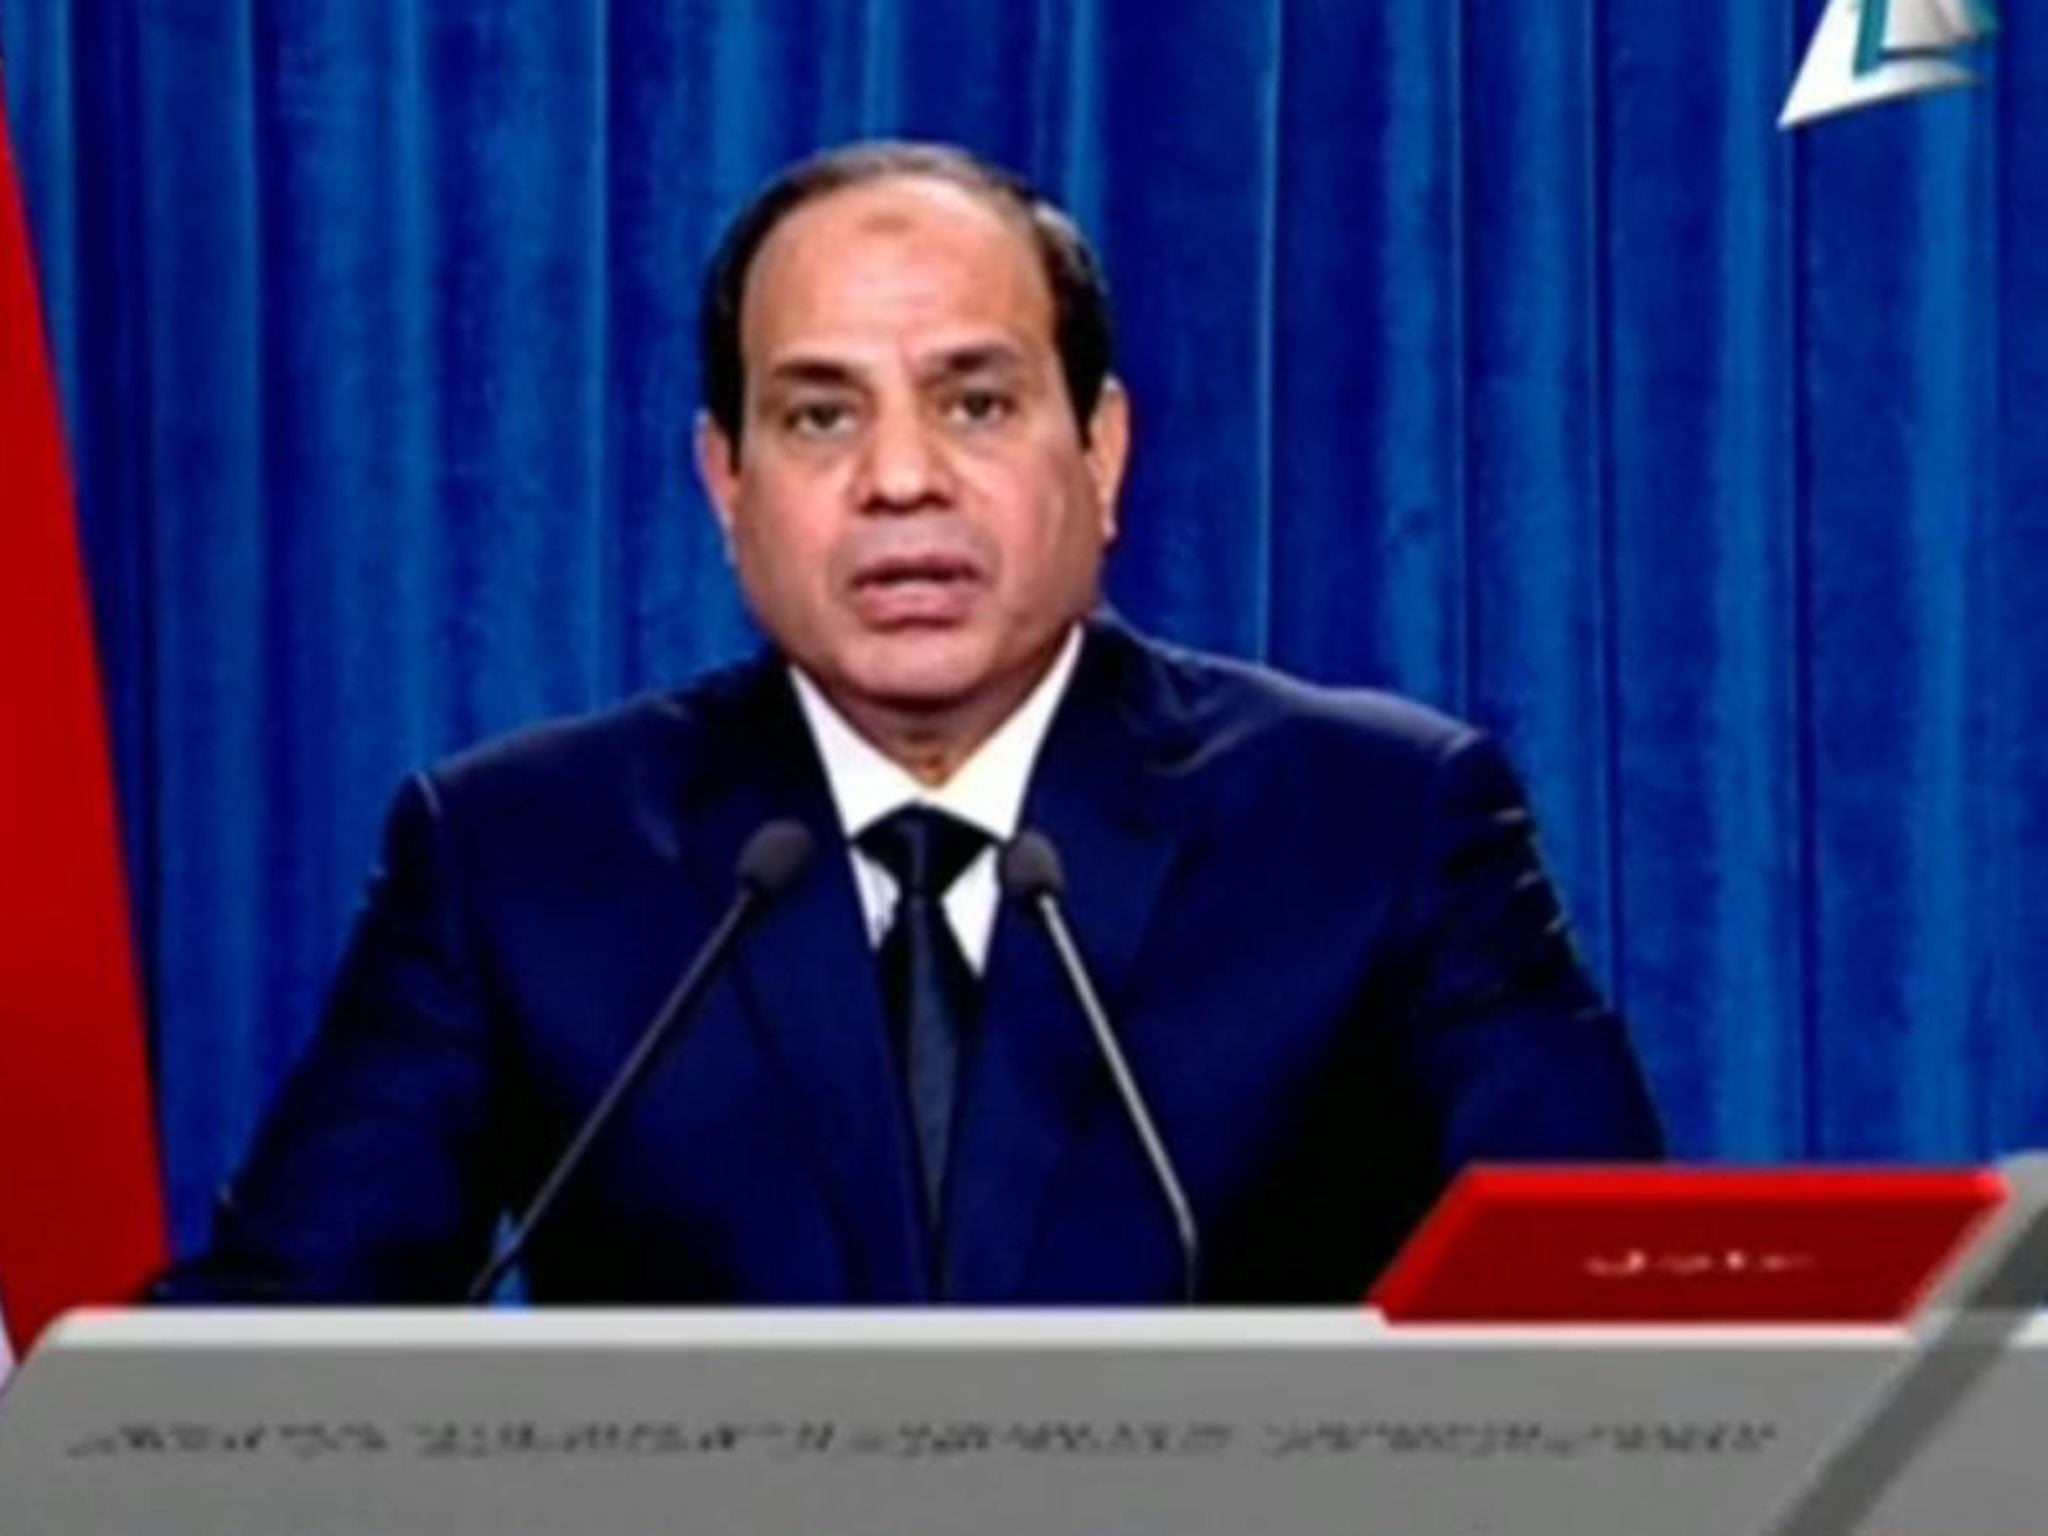 President Abdel Fattah al-Sisi speaks on Egyptian state TV after Isis released a video purporting to show the beheading of 21 Coptic Christian hostages